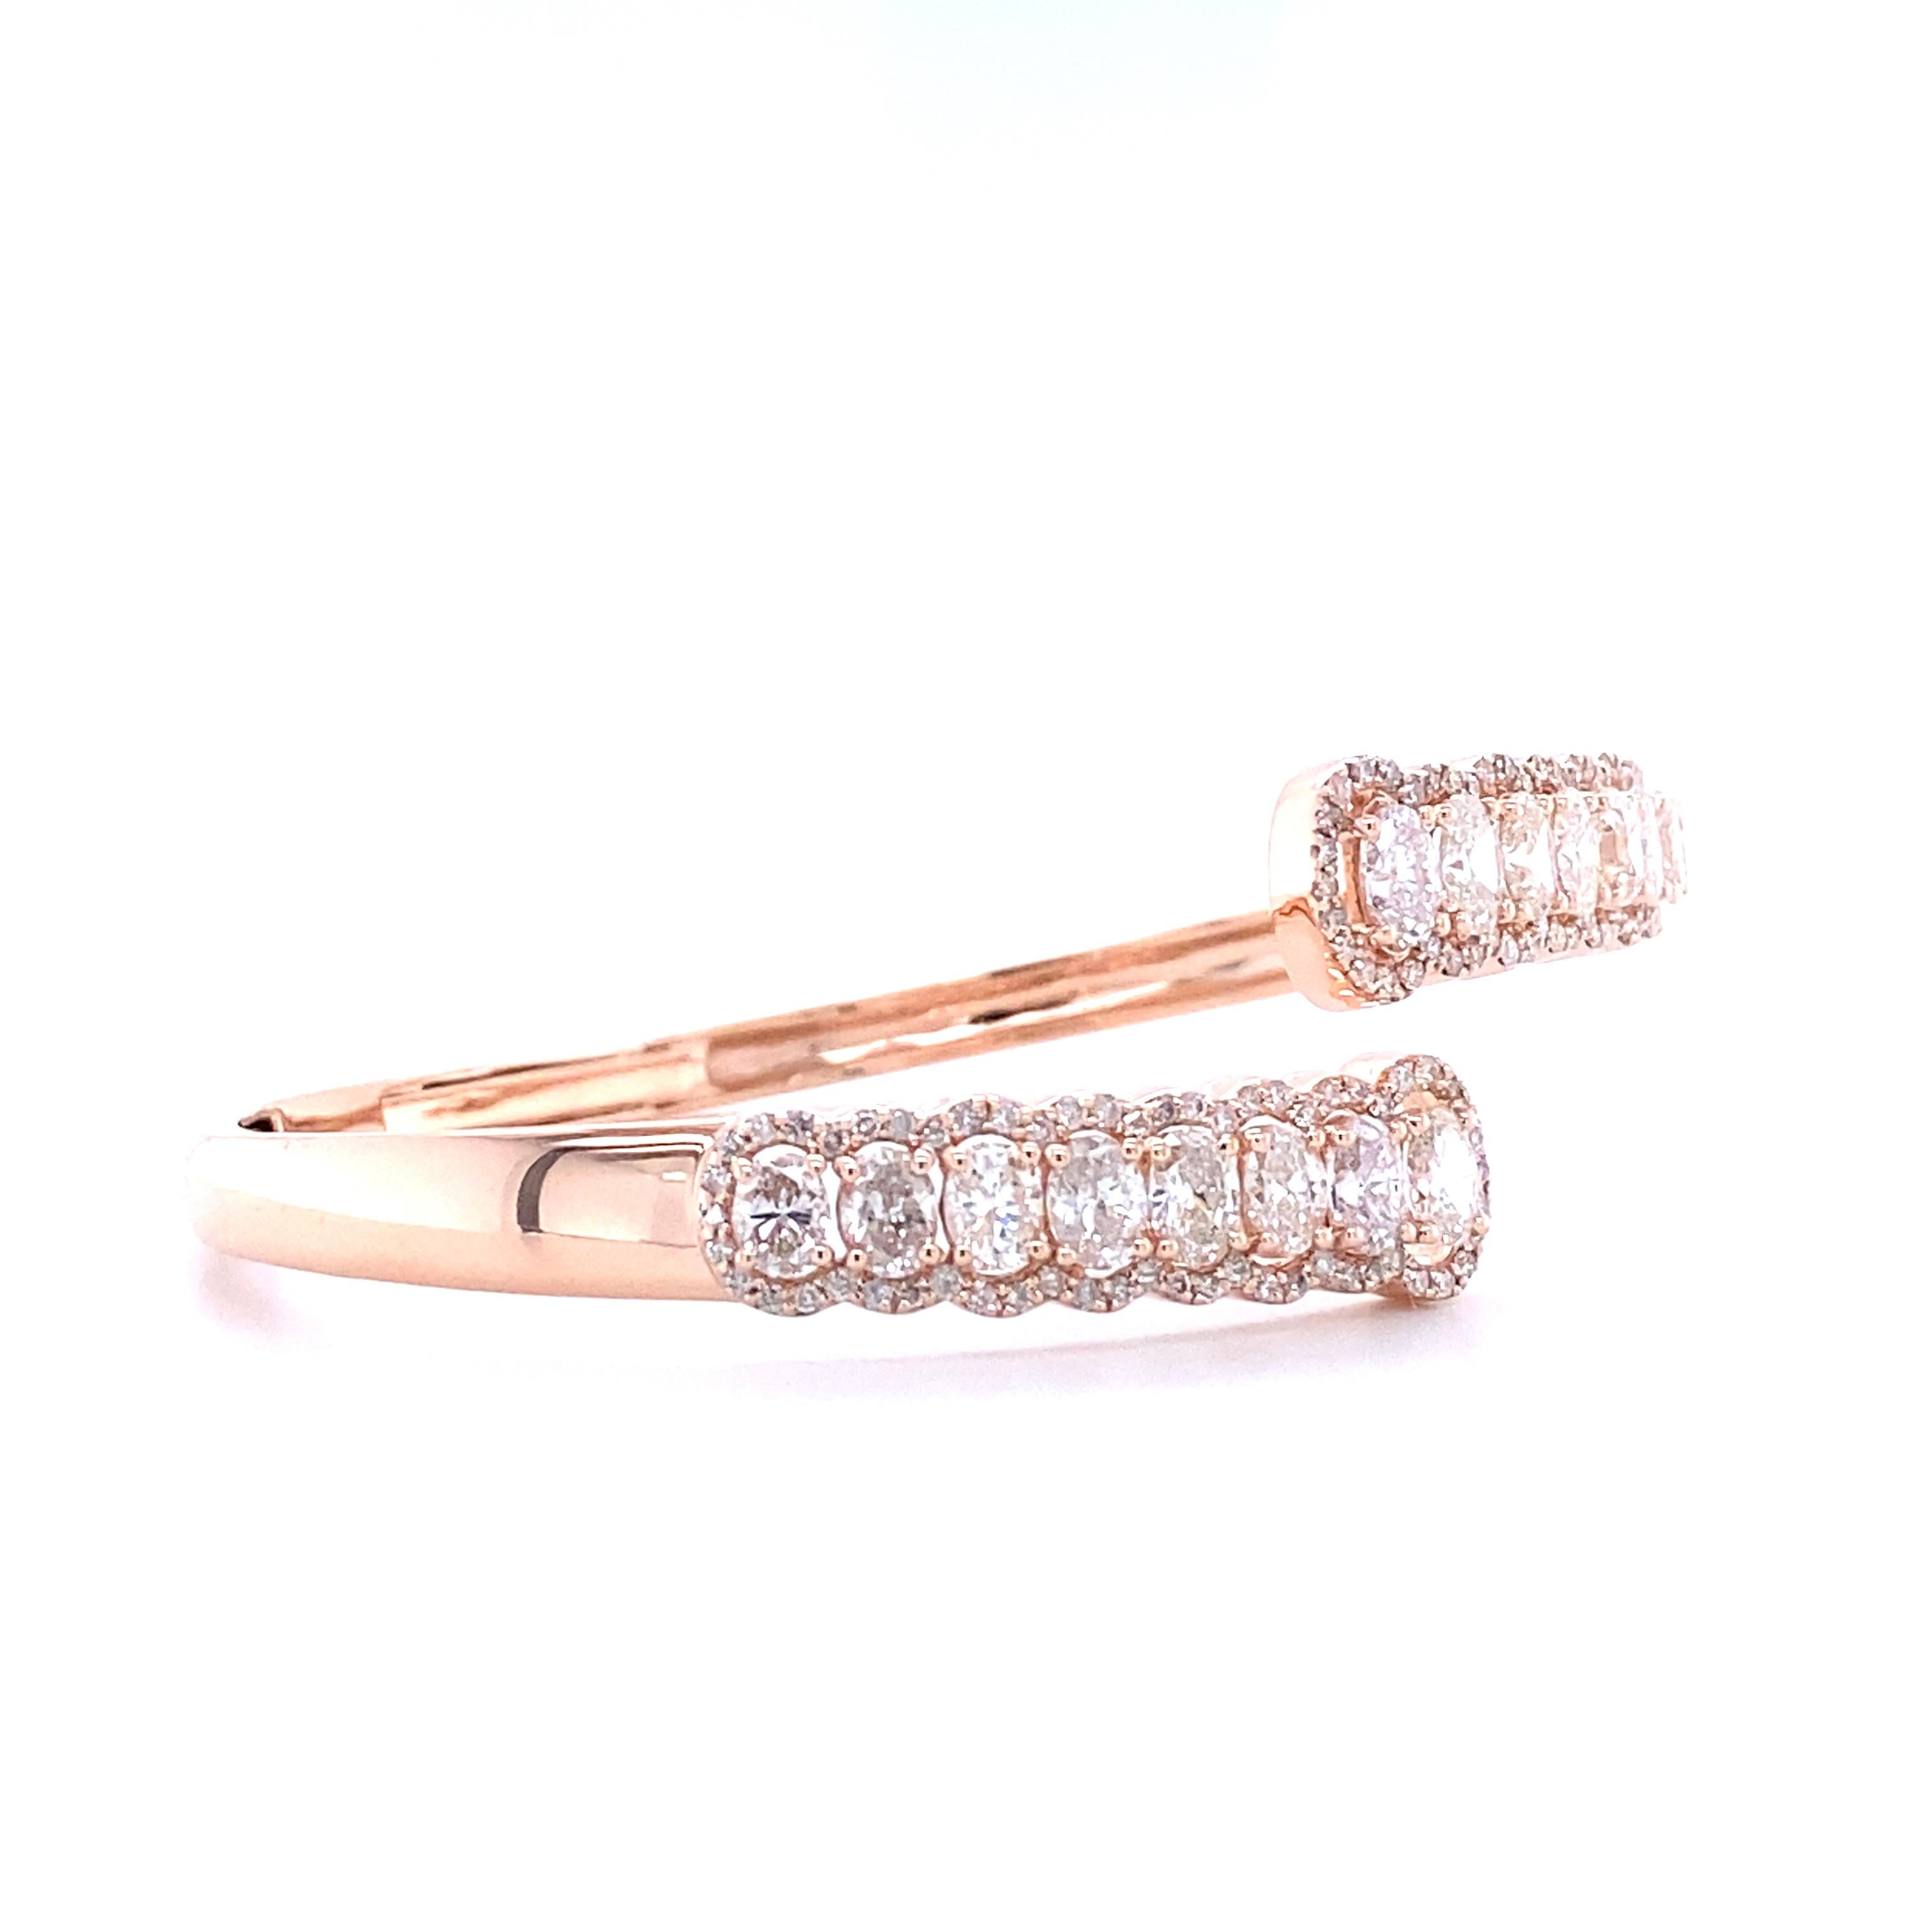 The Oval Diamond Bracelet With Ascending Design Cuff is an exquisite piece of jewelry crafted from high-quality 18k solid gold. The bracelet features a series of oval-cut diamonds arranged in an ascending design along the cuff, creating a stunning